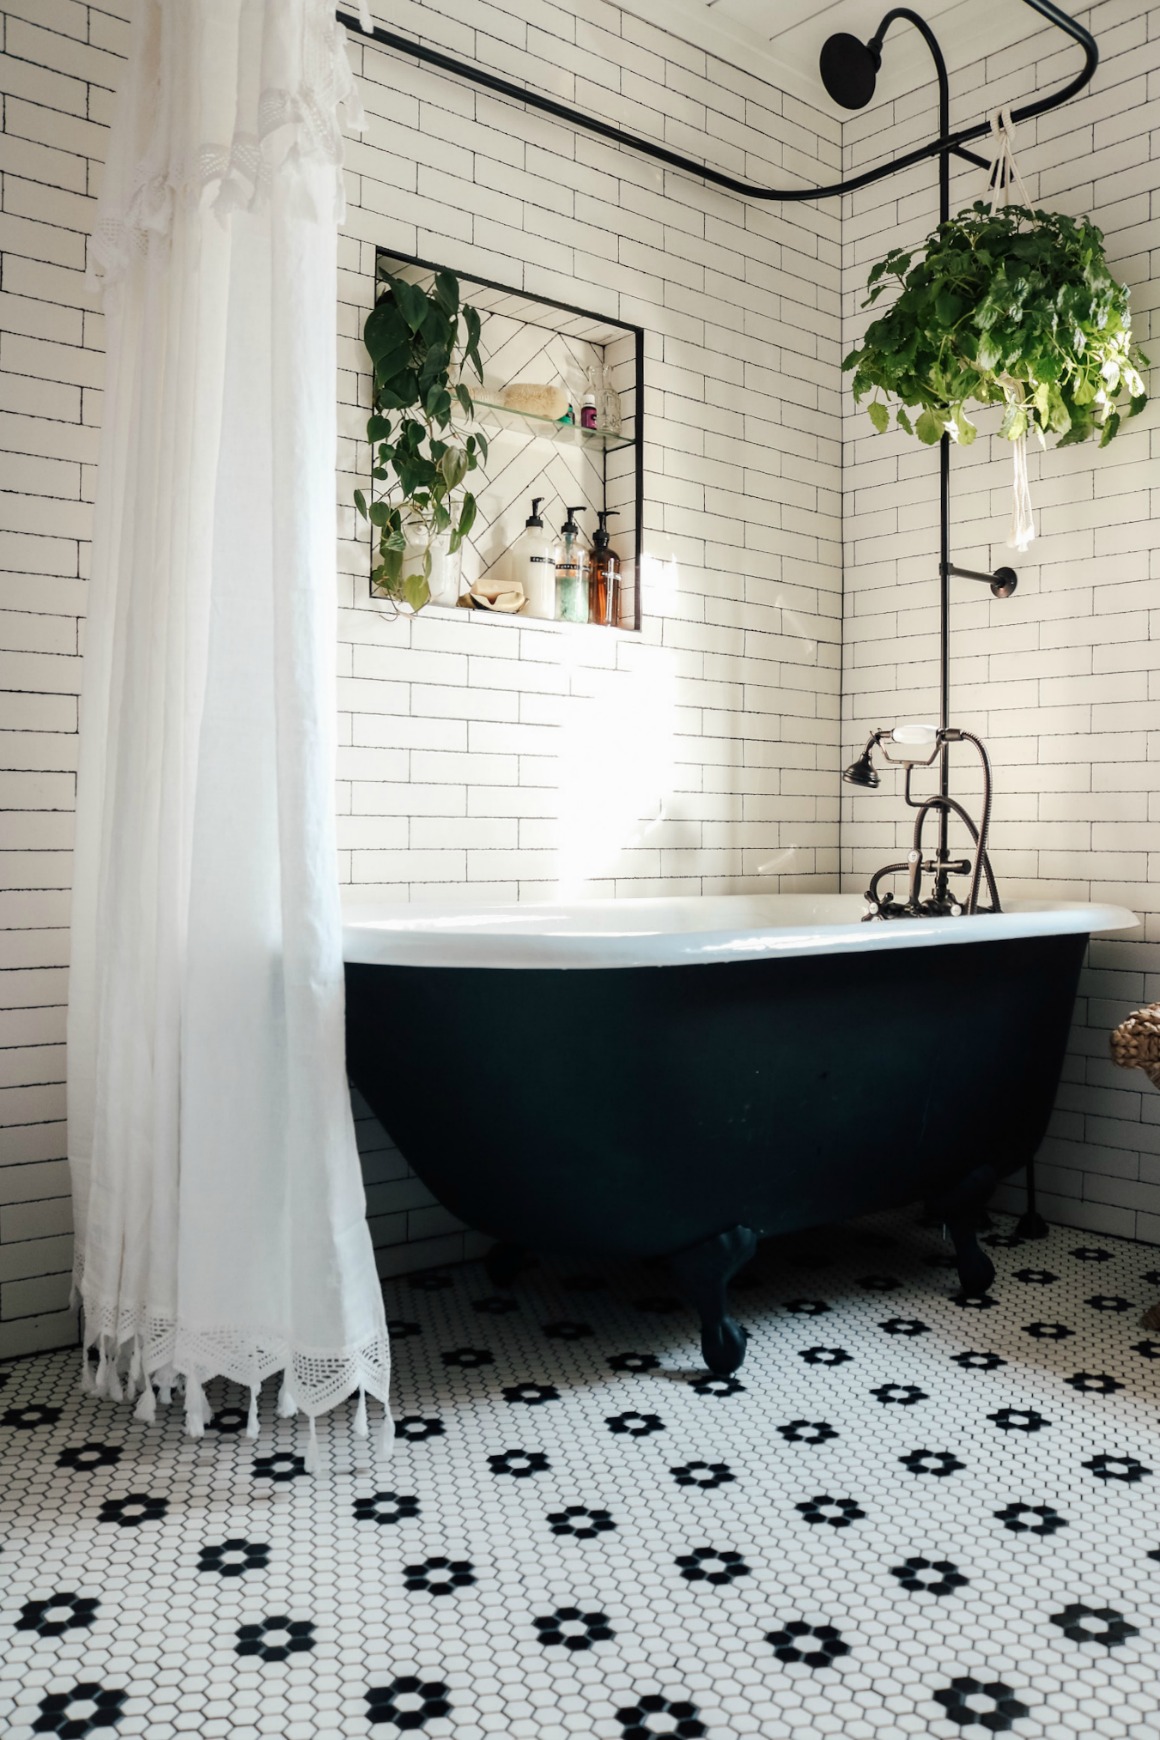 Master Bathroom Reveal with Claw Foot Tub